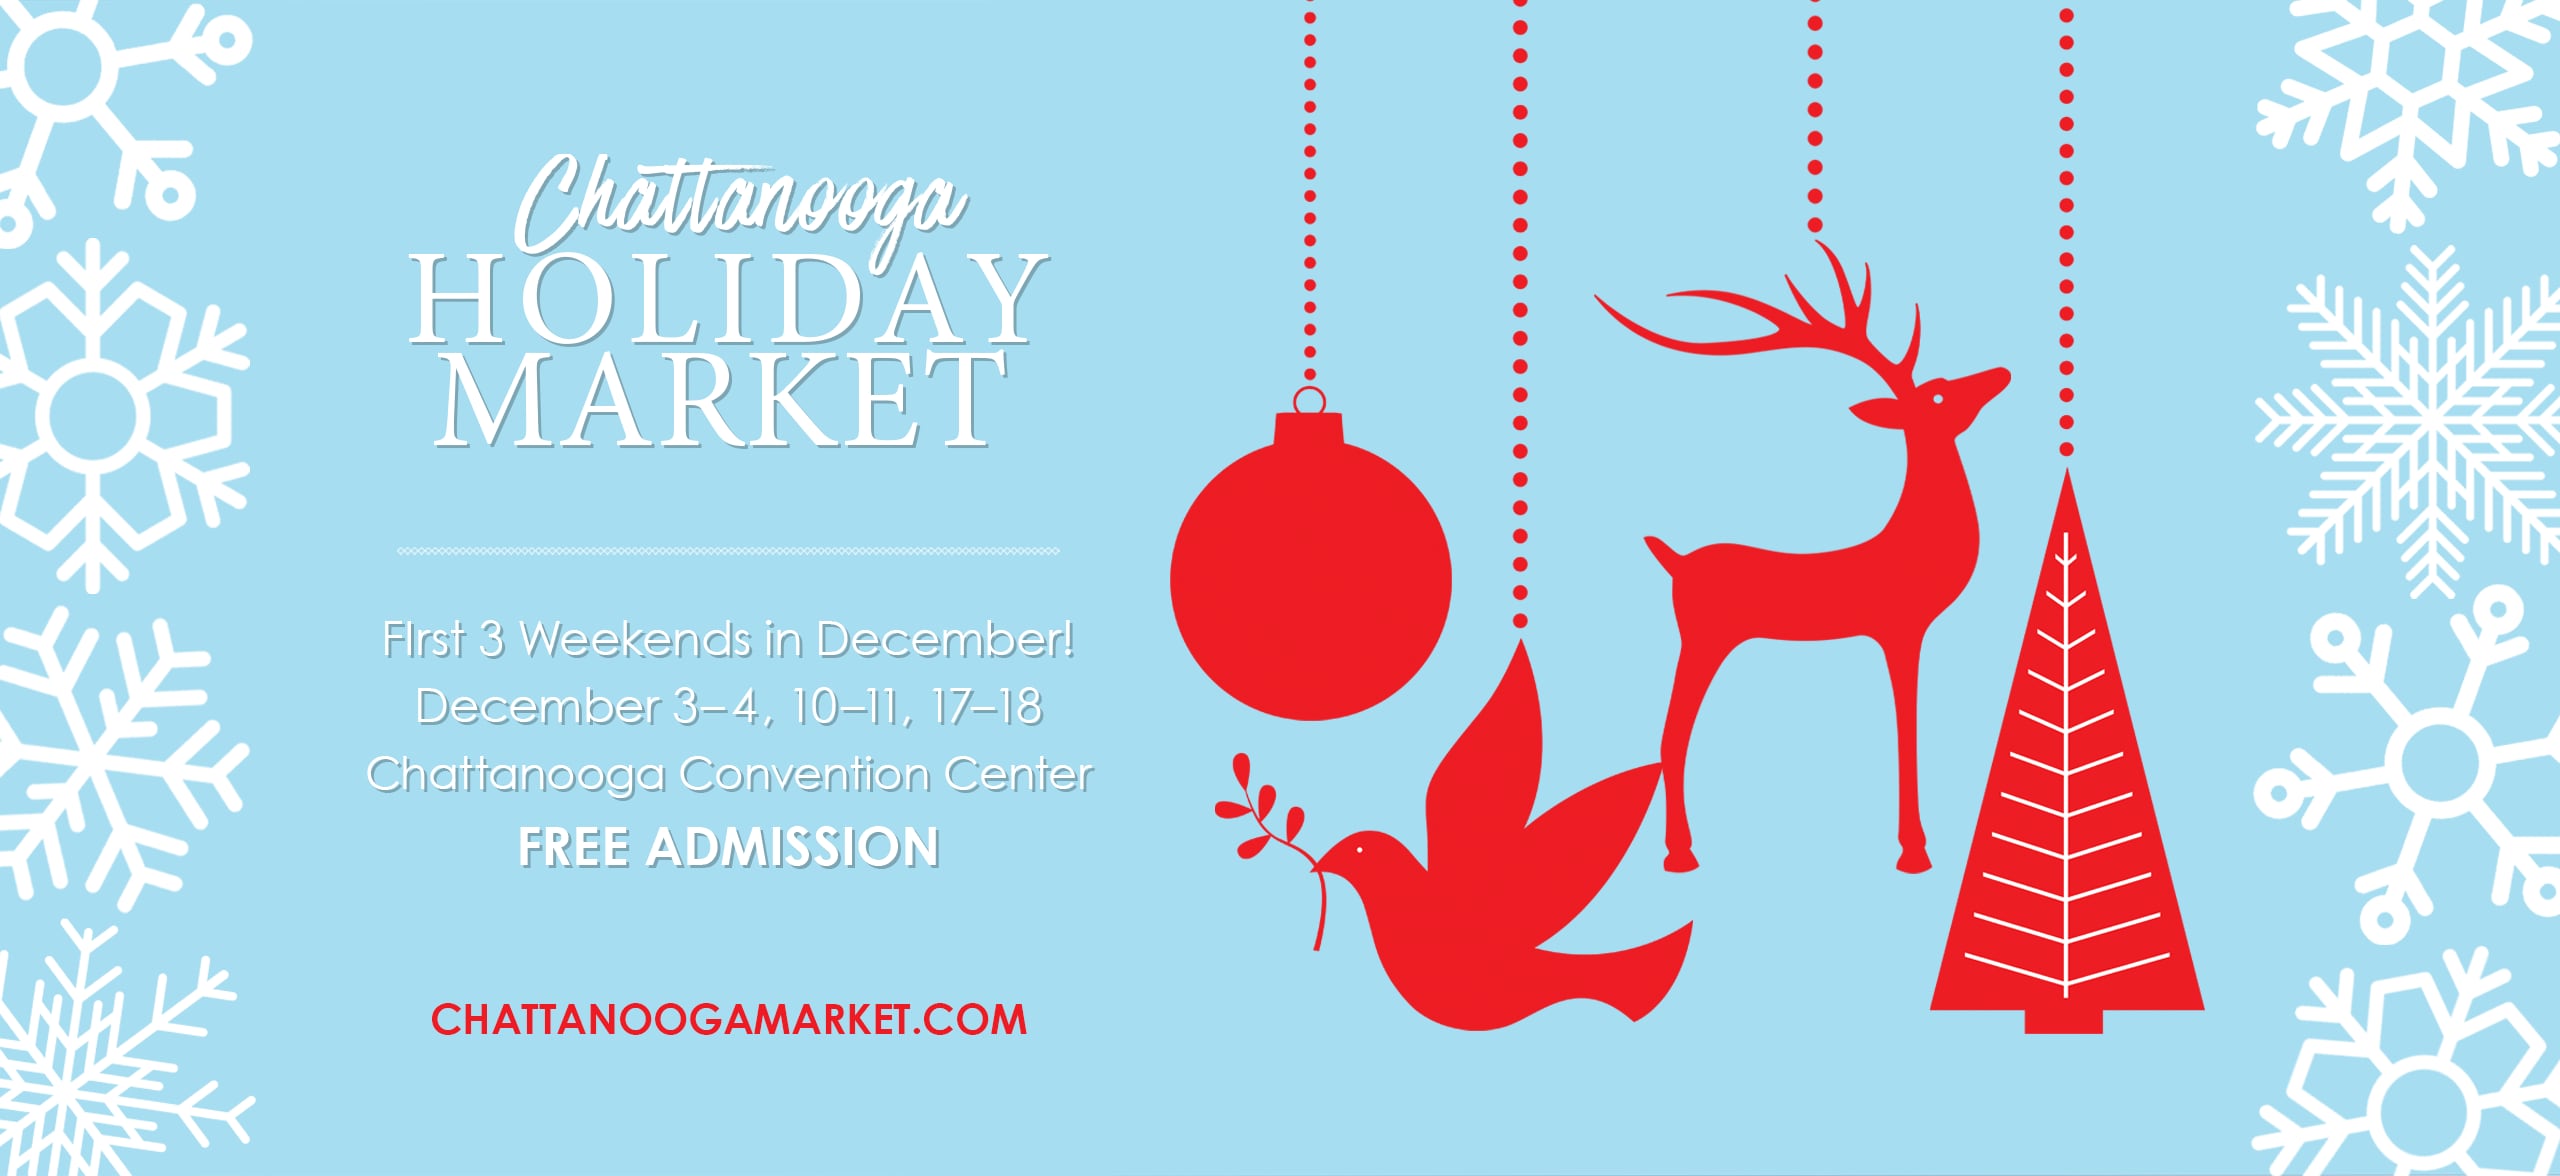 Announcing the 2022 Chattanooga Holiday Market